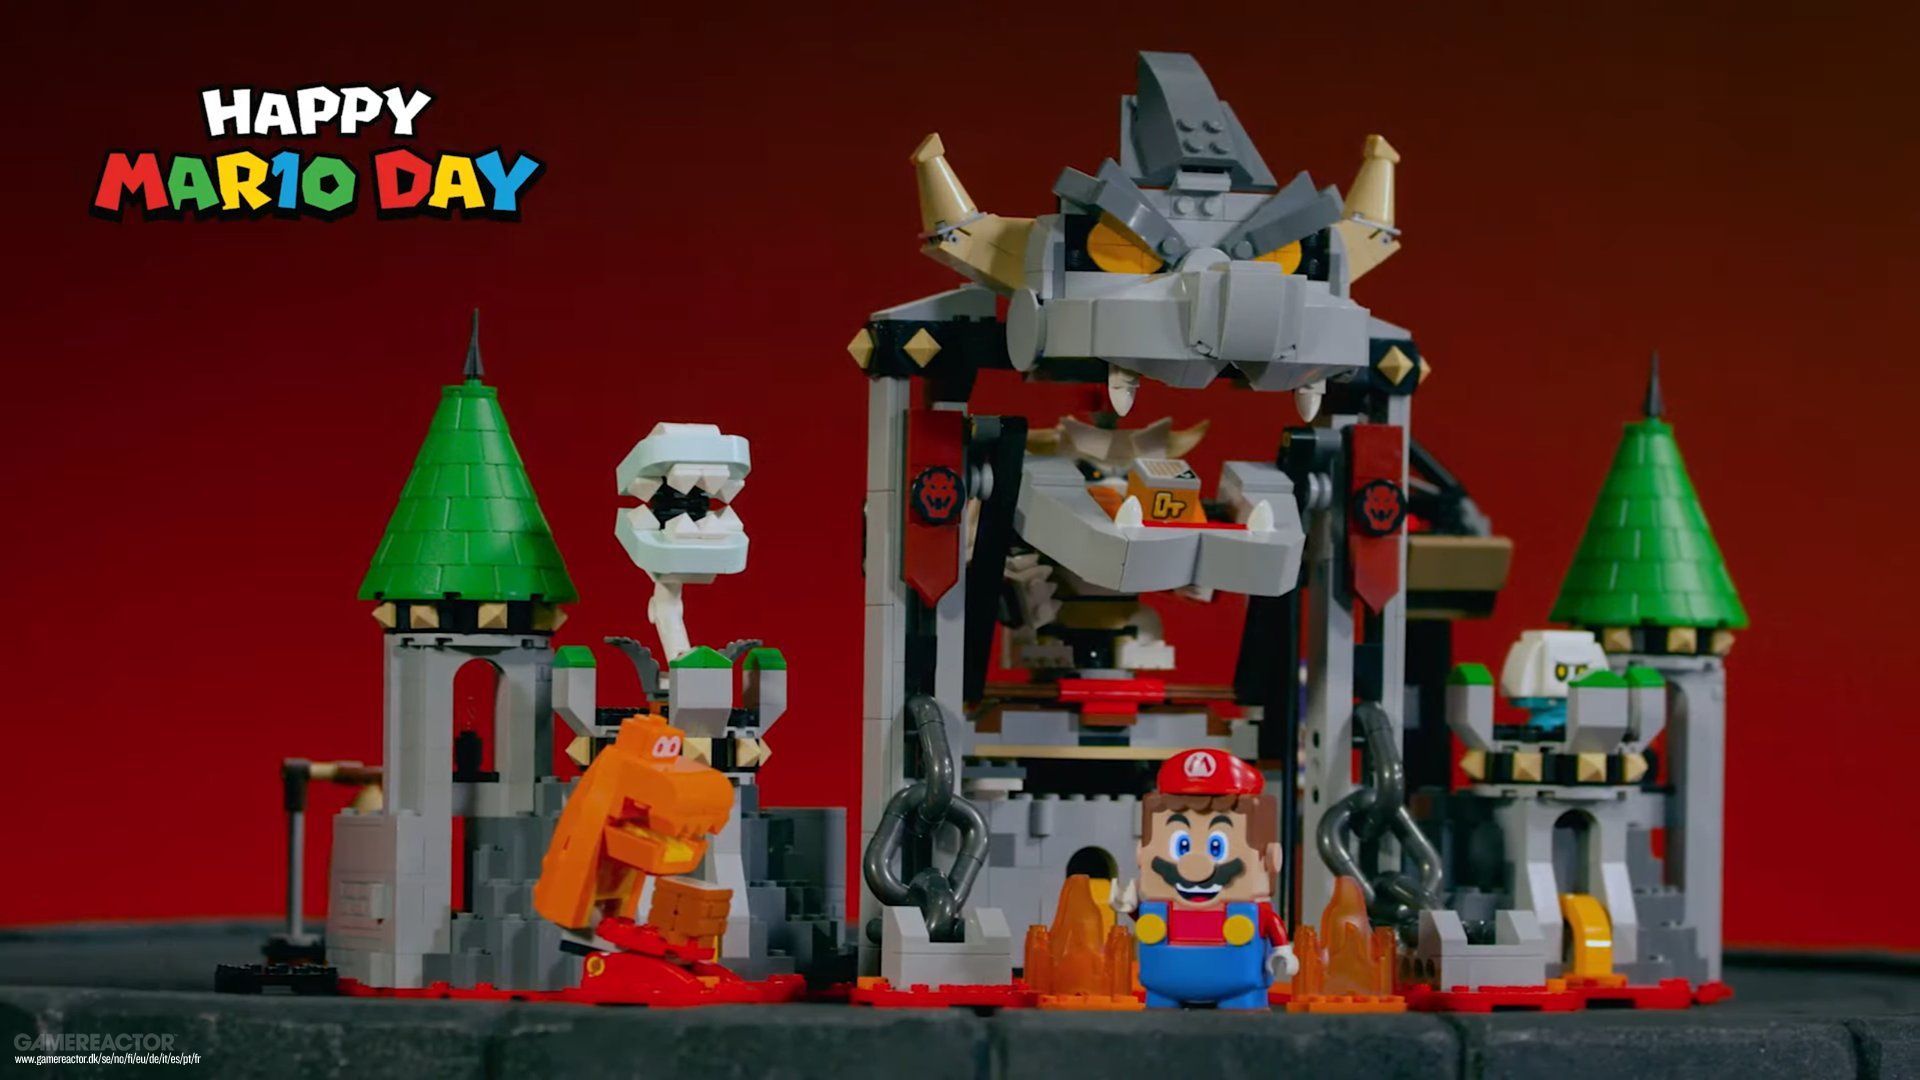 Celebrate March 10 by discovering the character’s Lego collection